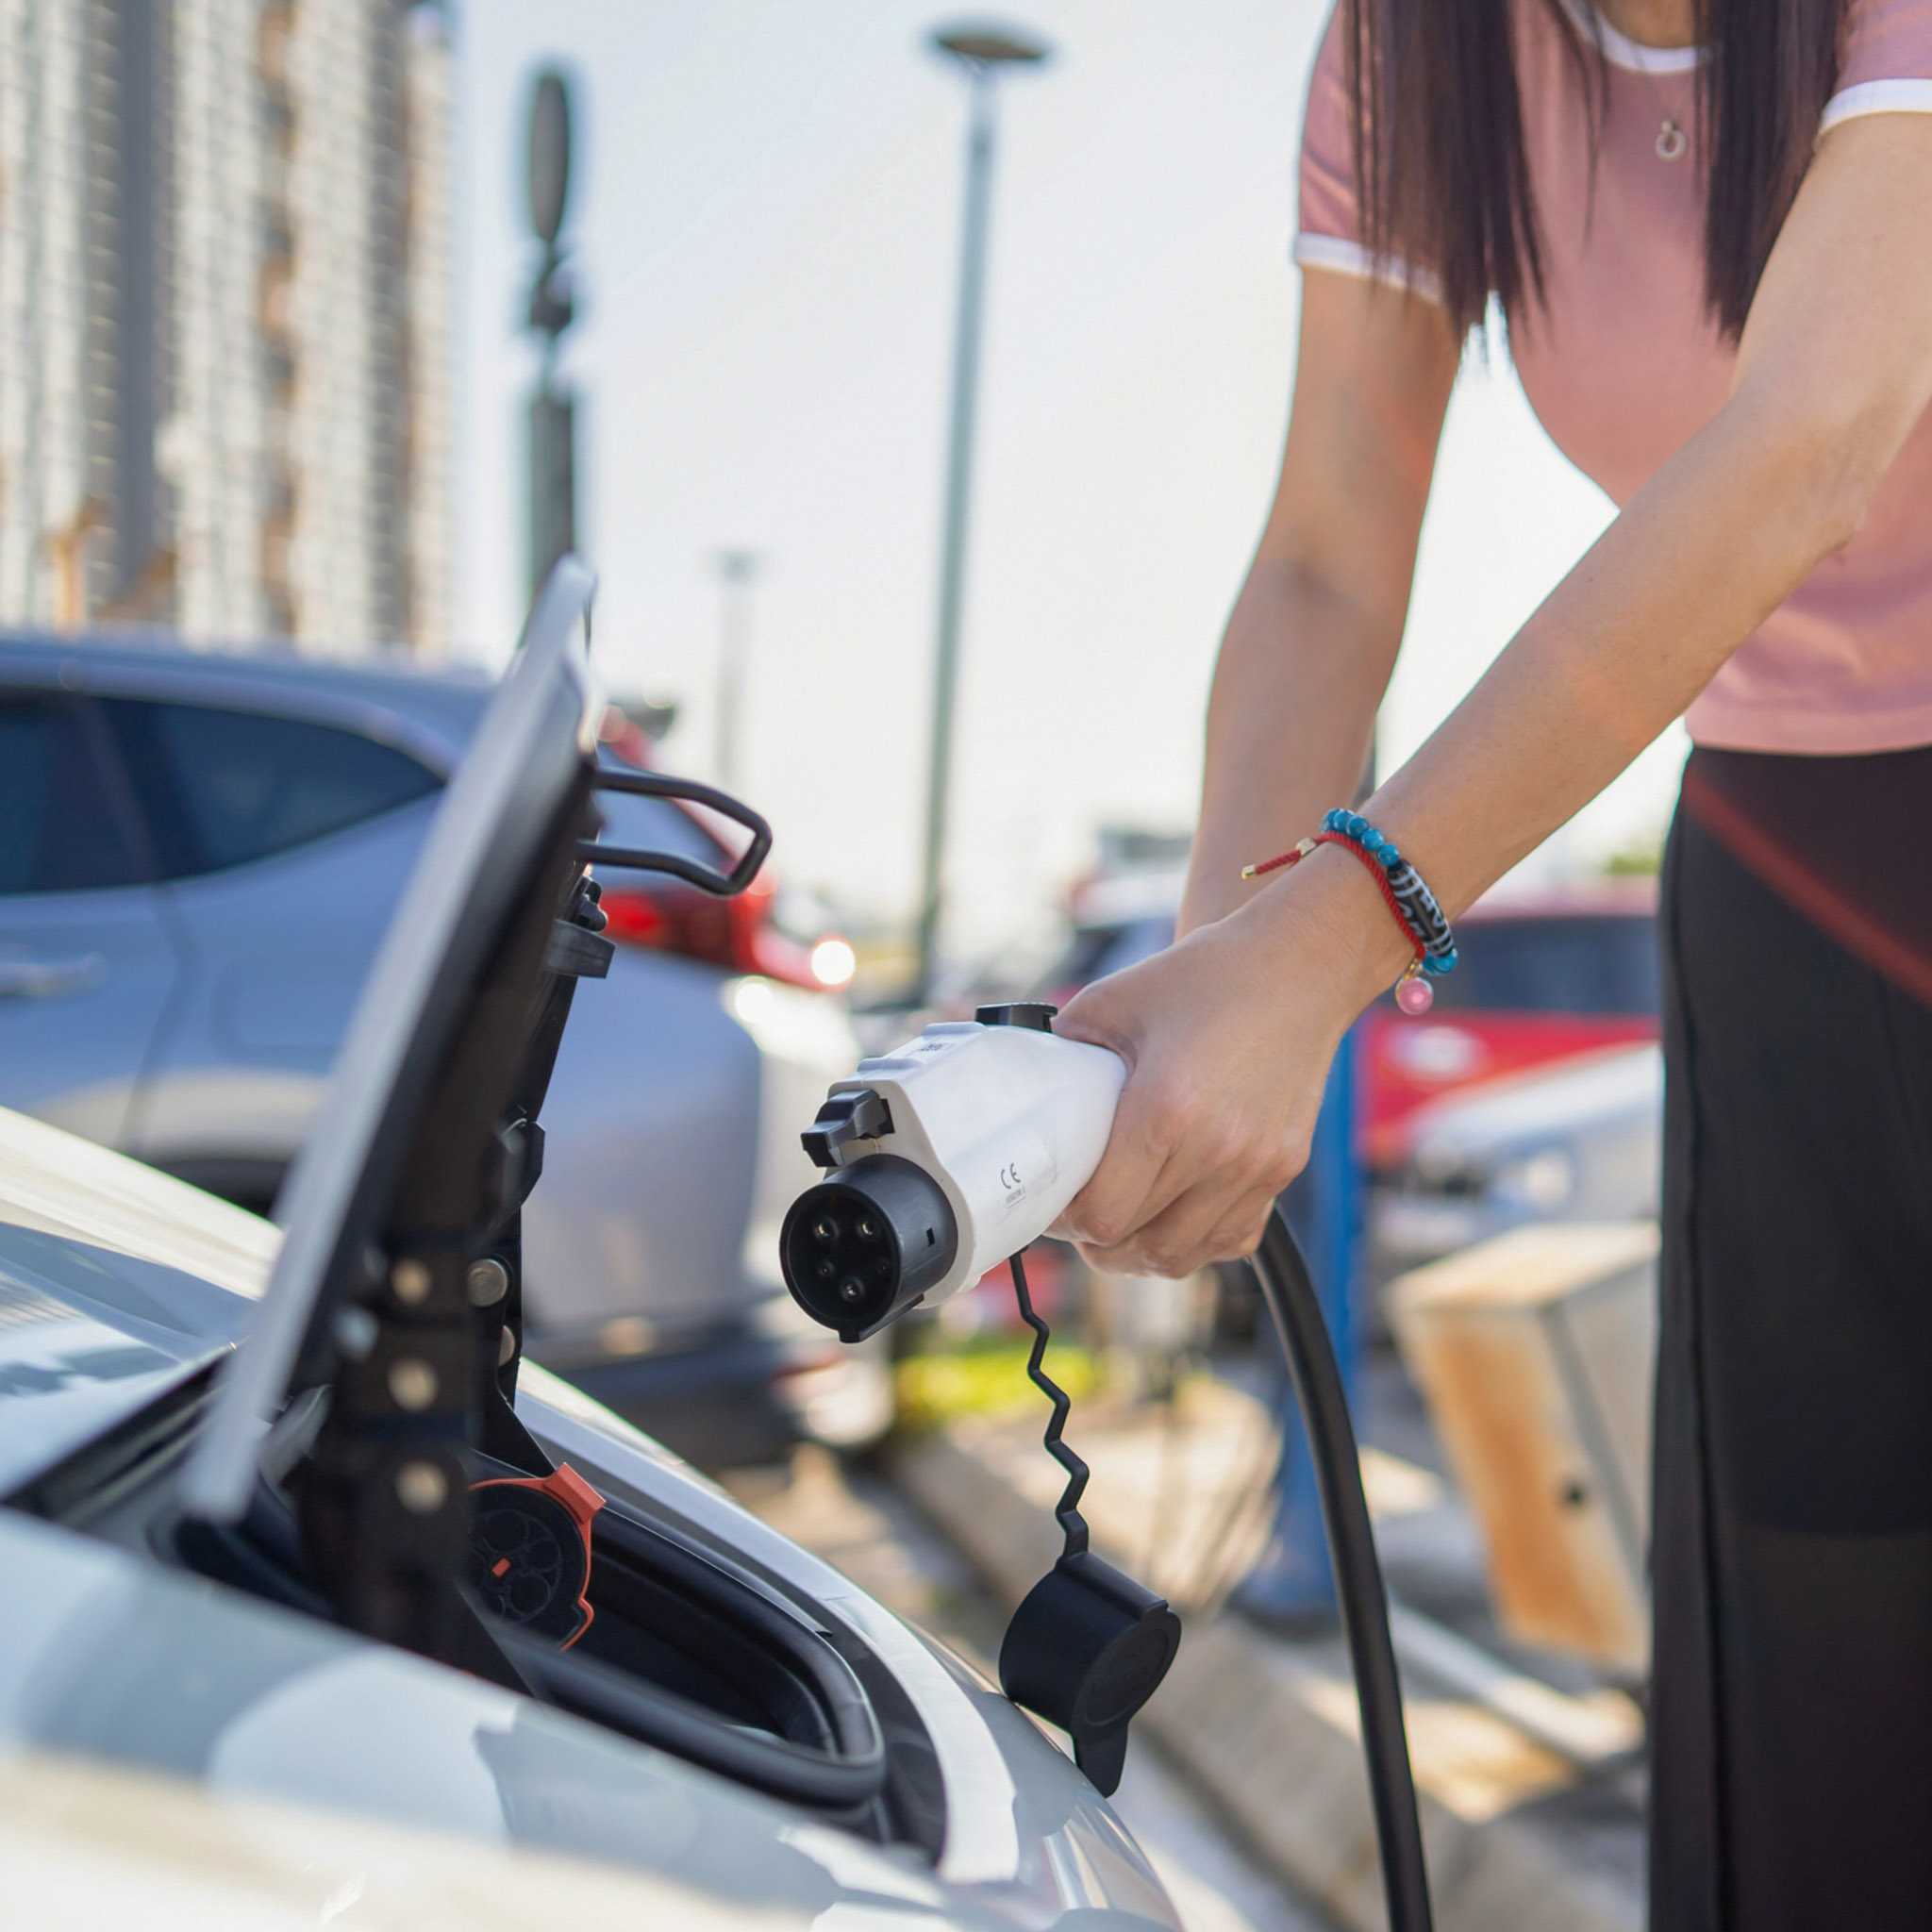 The Rise of China's EV Industry